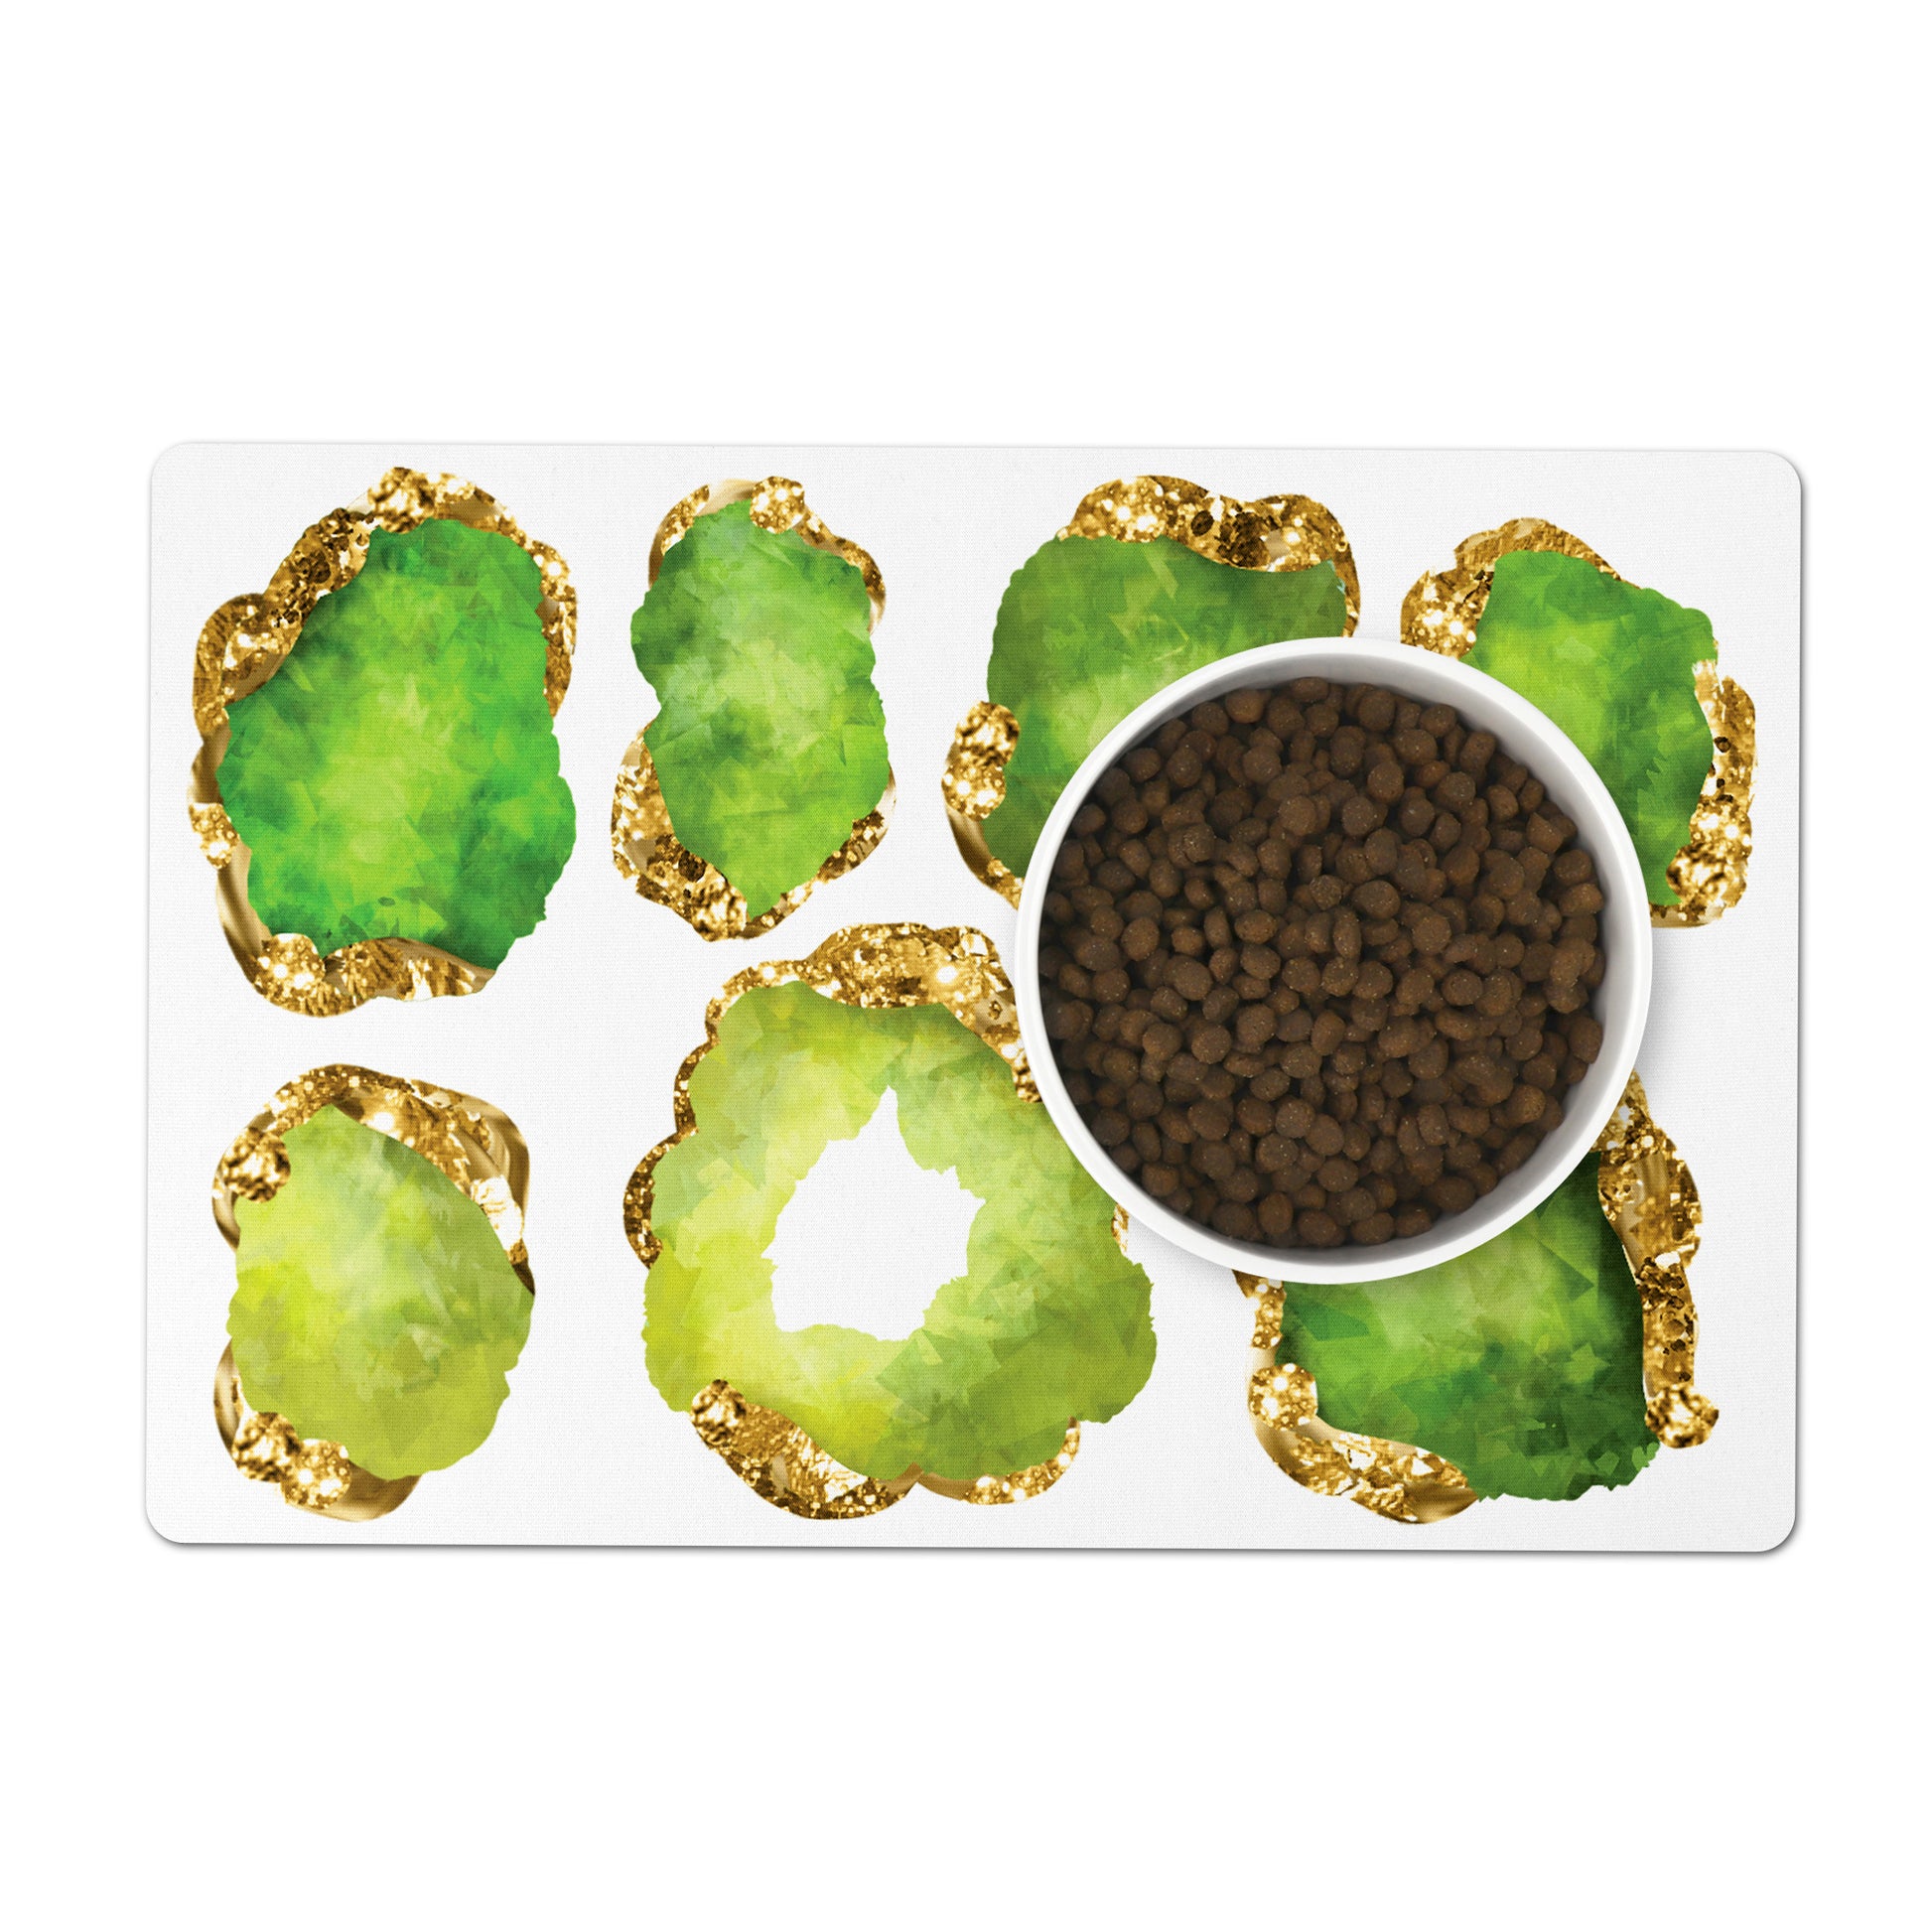 Green peridot and gold gemstone print dog or cat food mat for the floor